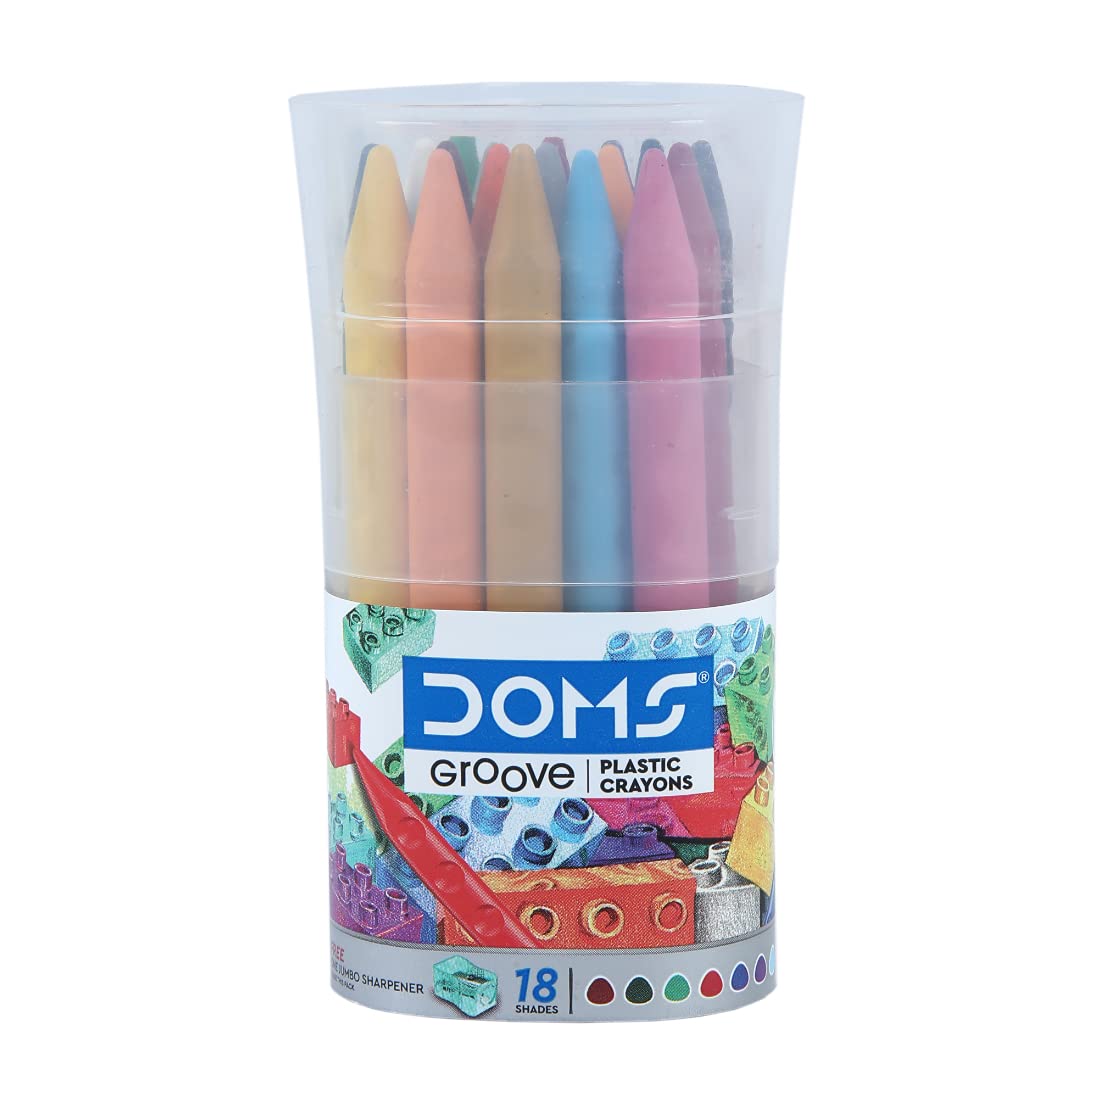 Doms Groove Plastic Crayon 18 Shades